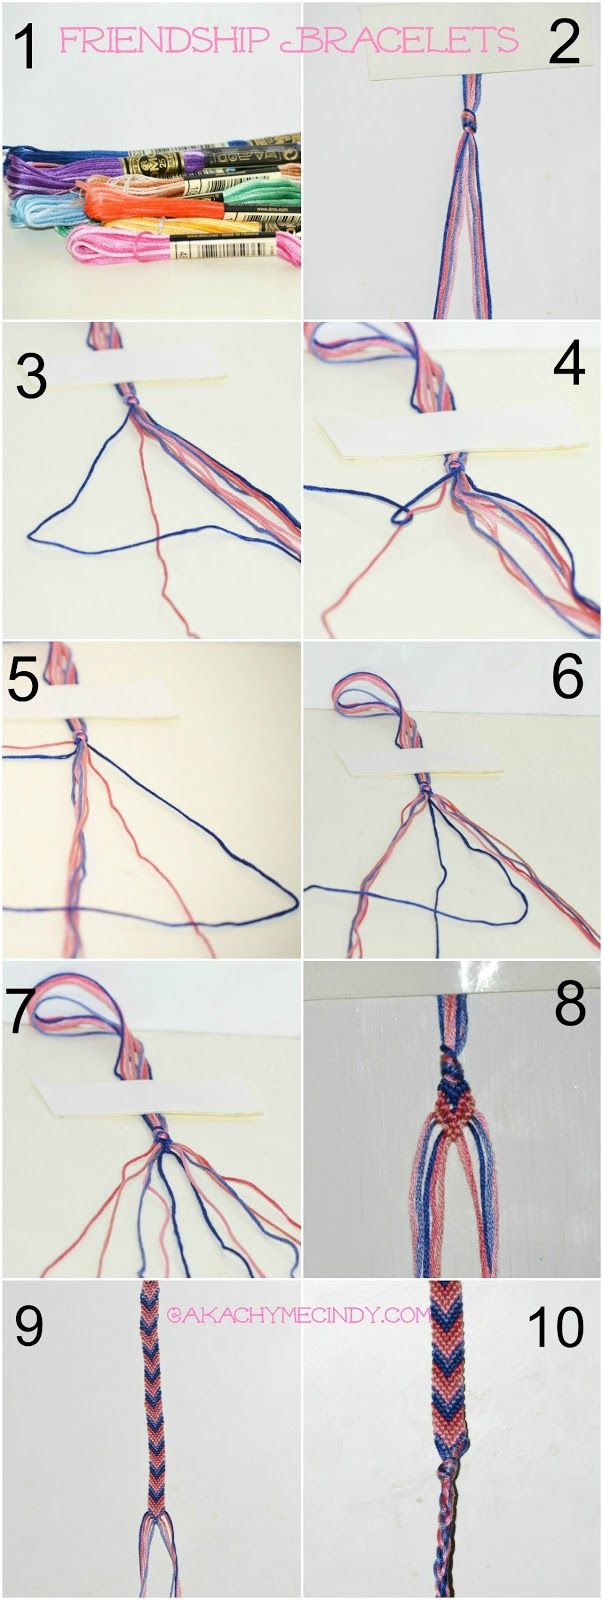 Embroidery Floss Bracelets Patterns 18 Making Bracelets With Embroidery Thread 25 Best Ideas About Yarn